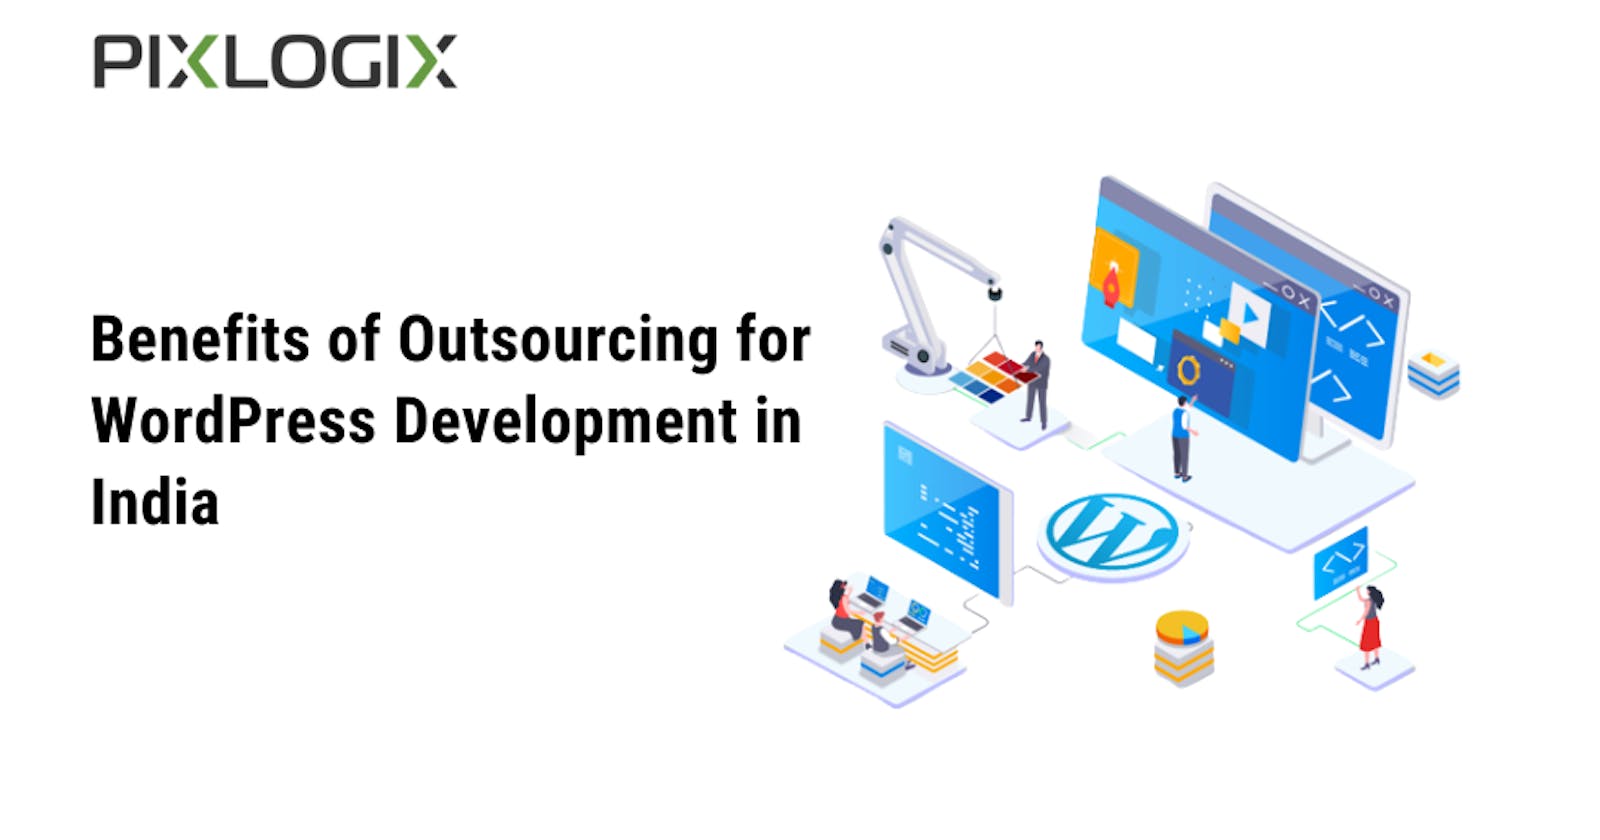 What are The Benefits of Outsourcing for WordPress Development in India?